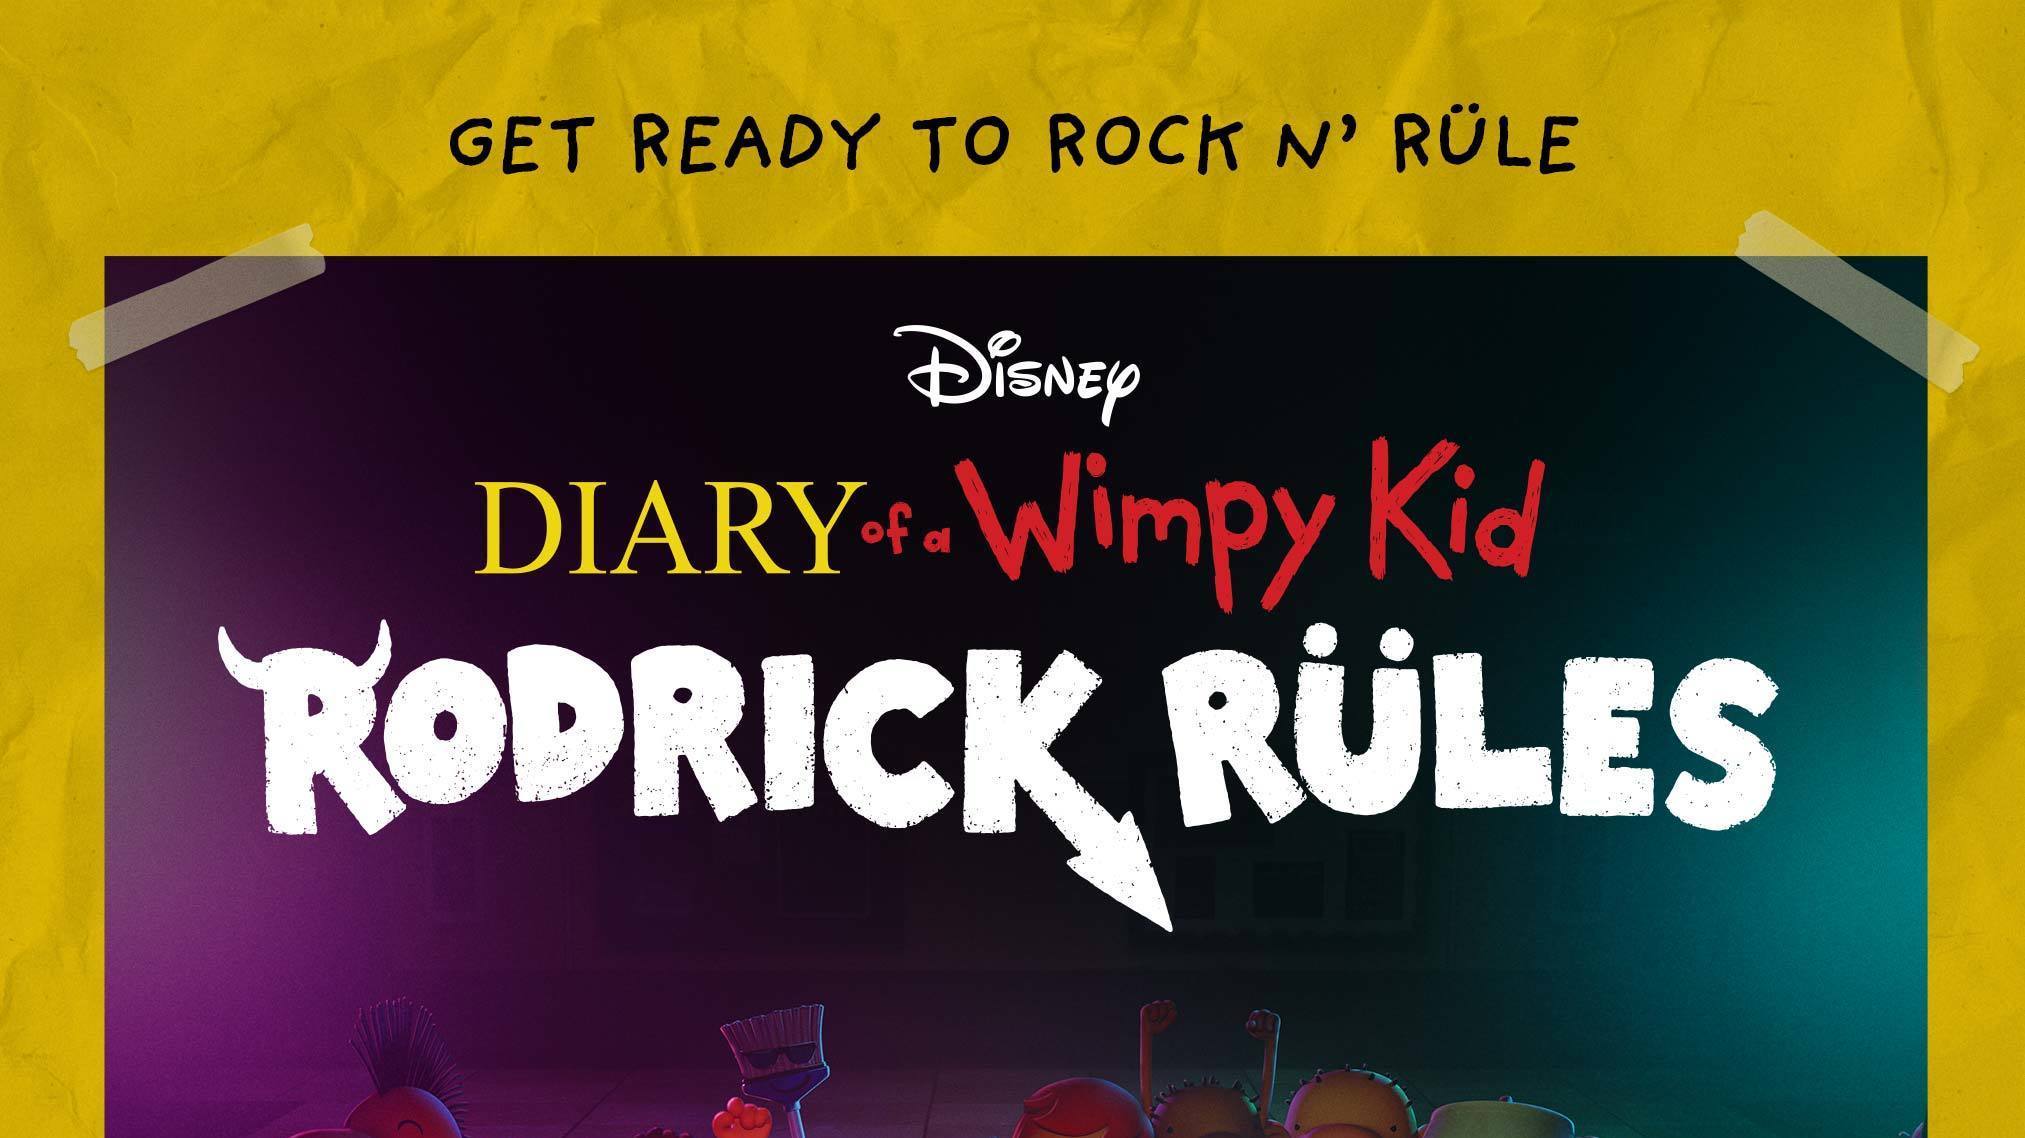 TRAILER AND KEY ART FOR DISNEY+ ORIGINAL MOVIE “DIARY OF A WIMPY KID: RODRICK RULES” AVAILABLE NOW